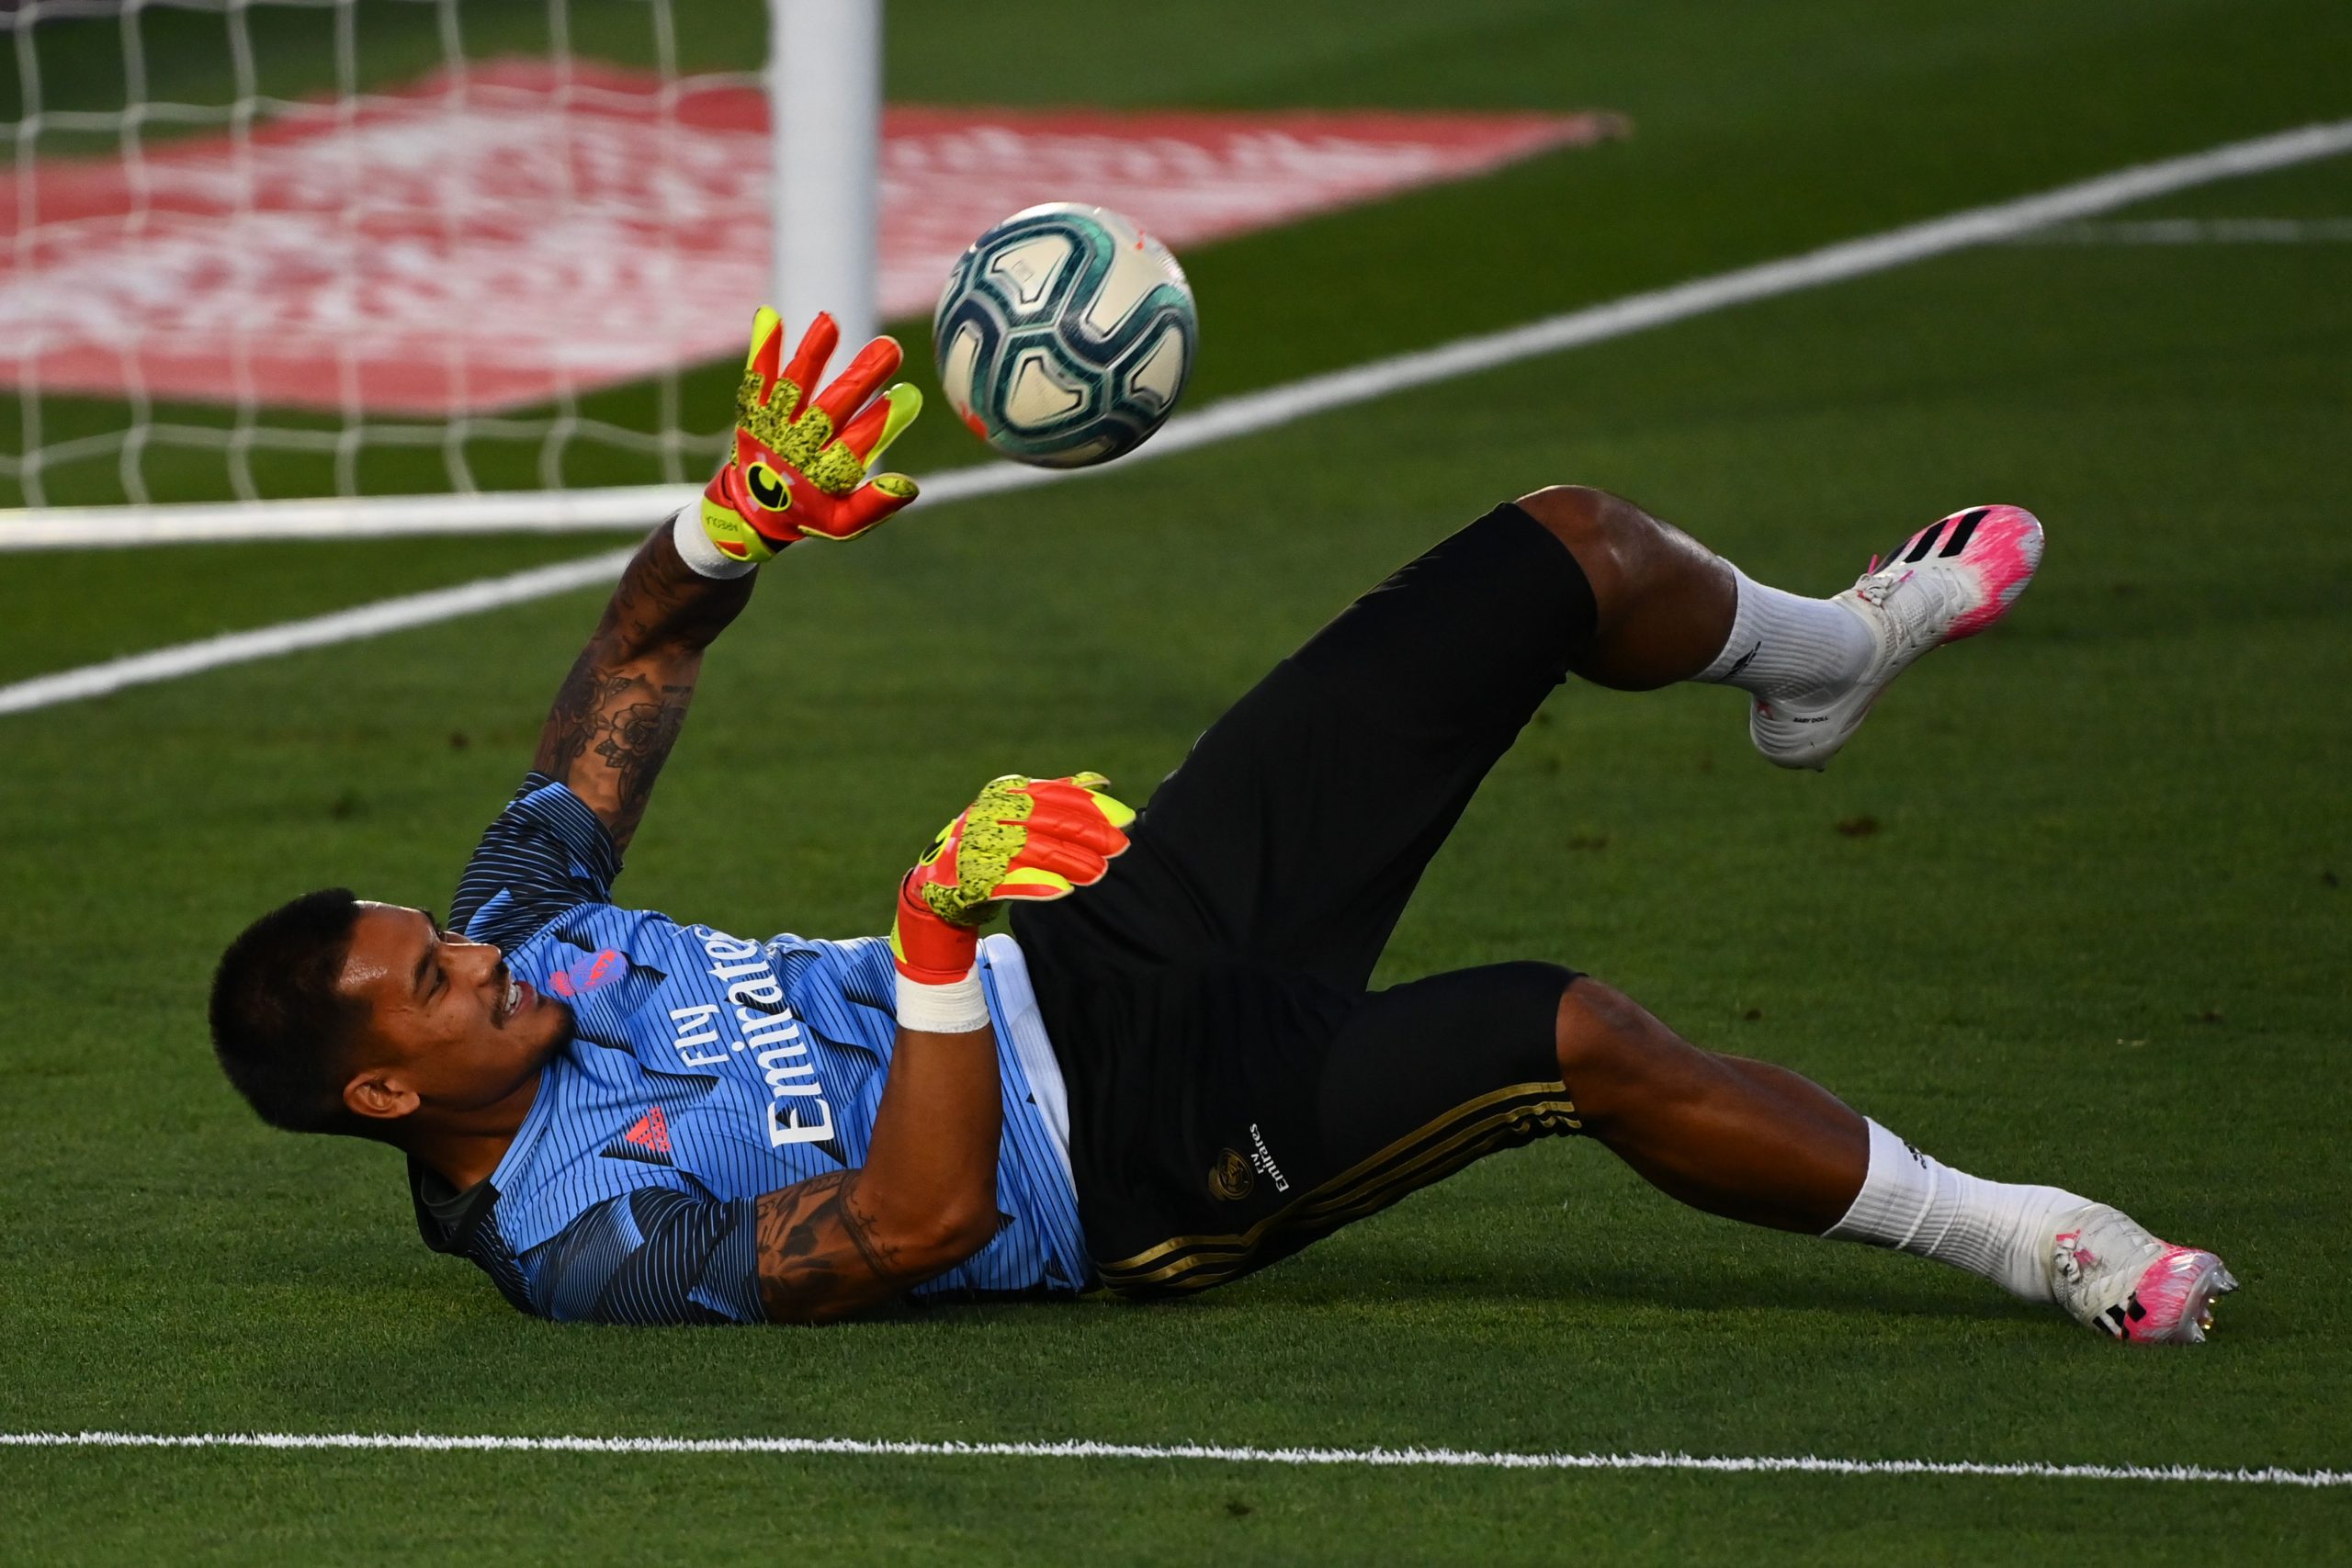 Newcastle United identify Alphonse Areola as a summer target (Areola in action in the picture)